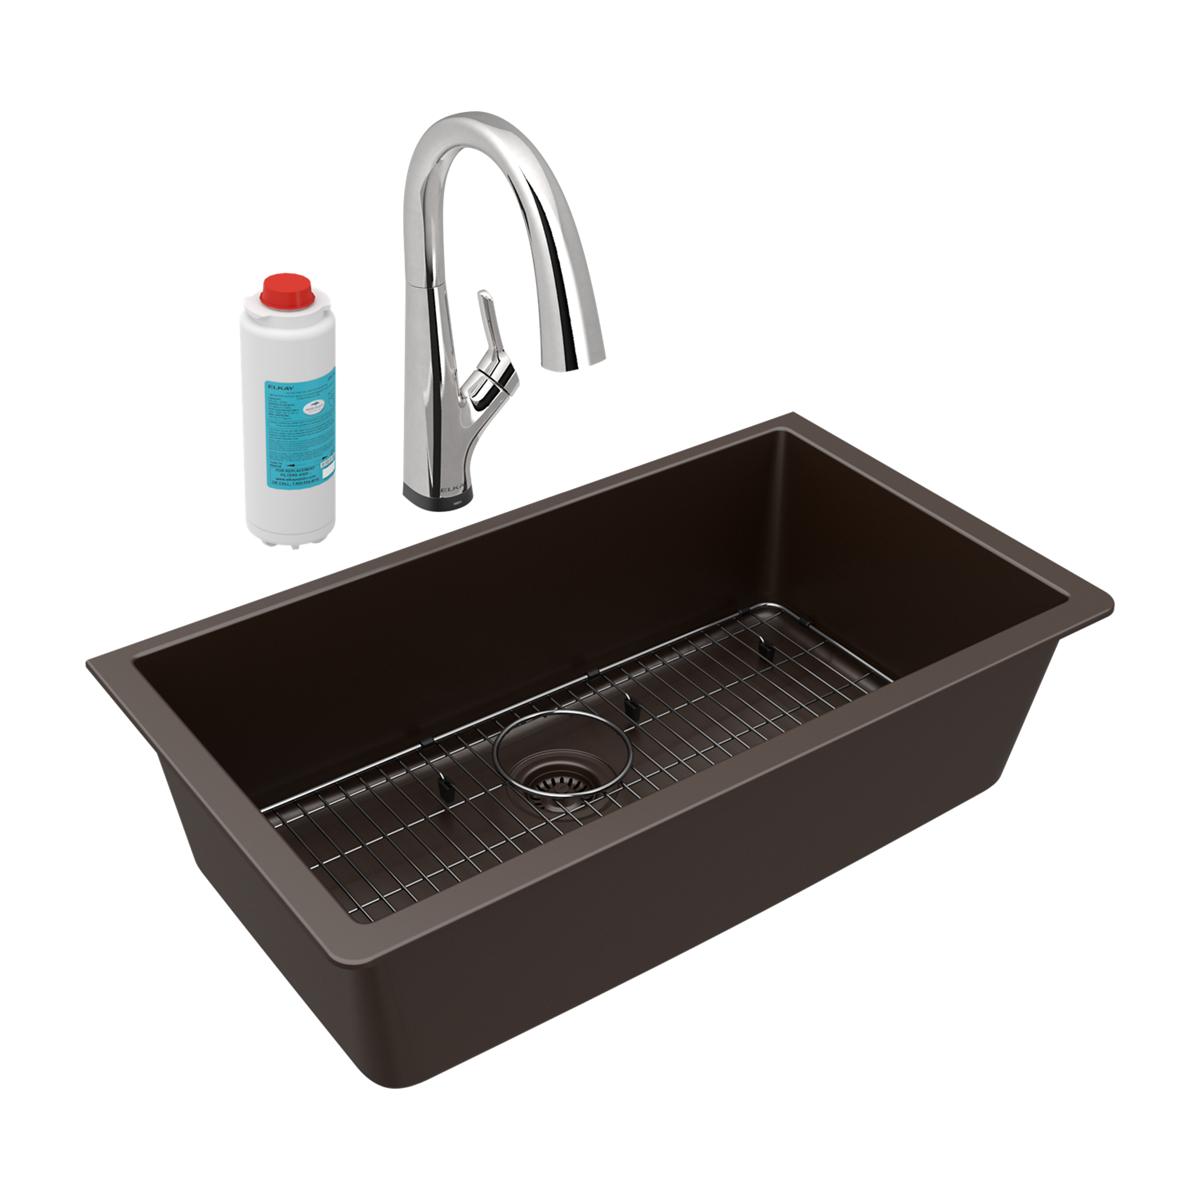 Elkay Quartz Classic 33" x 18-7/16" x 9-7/16" Single Bowl Undermount Sink Kit with Filtered Faucet